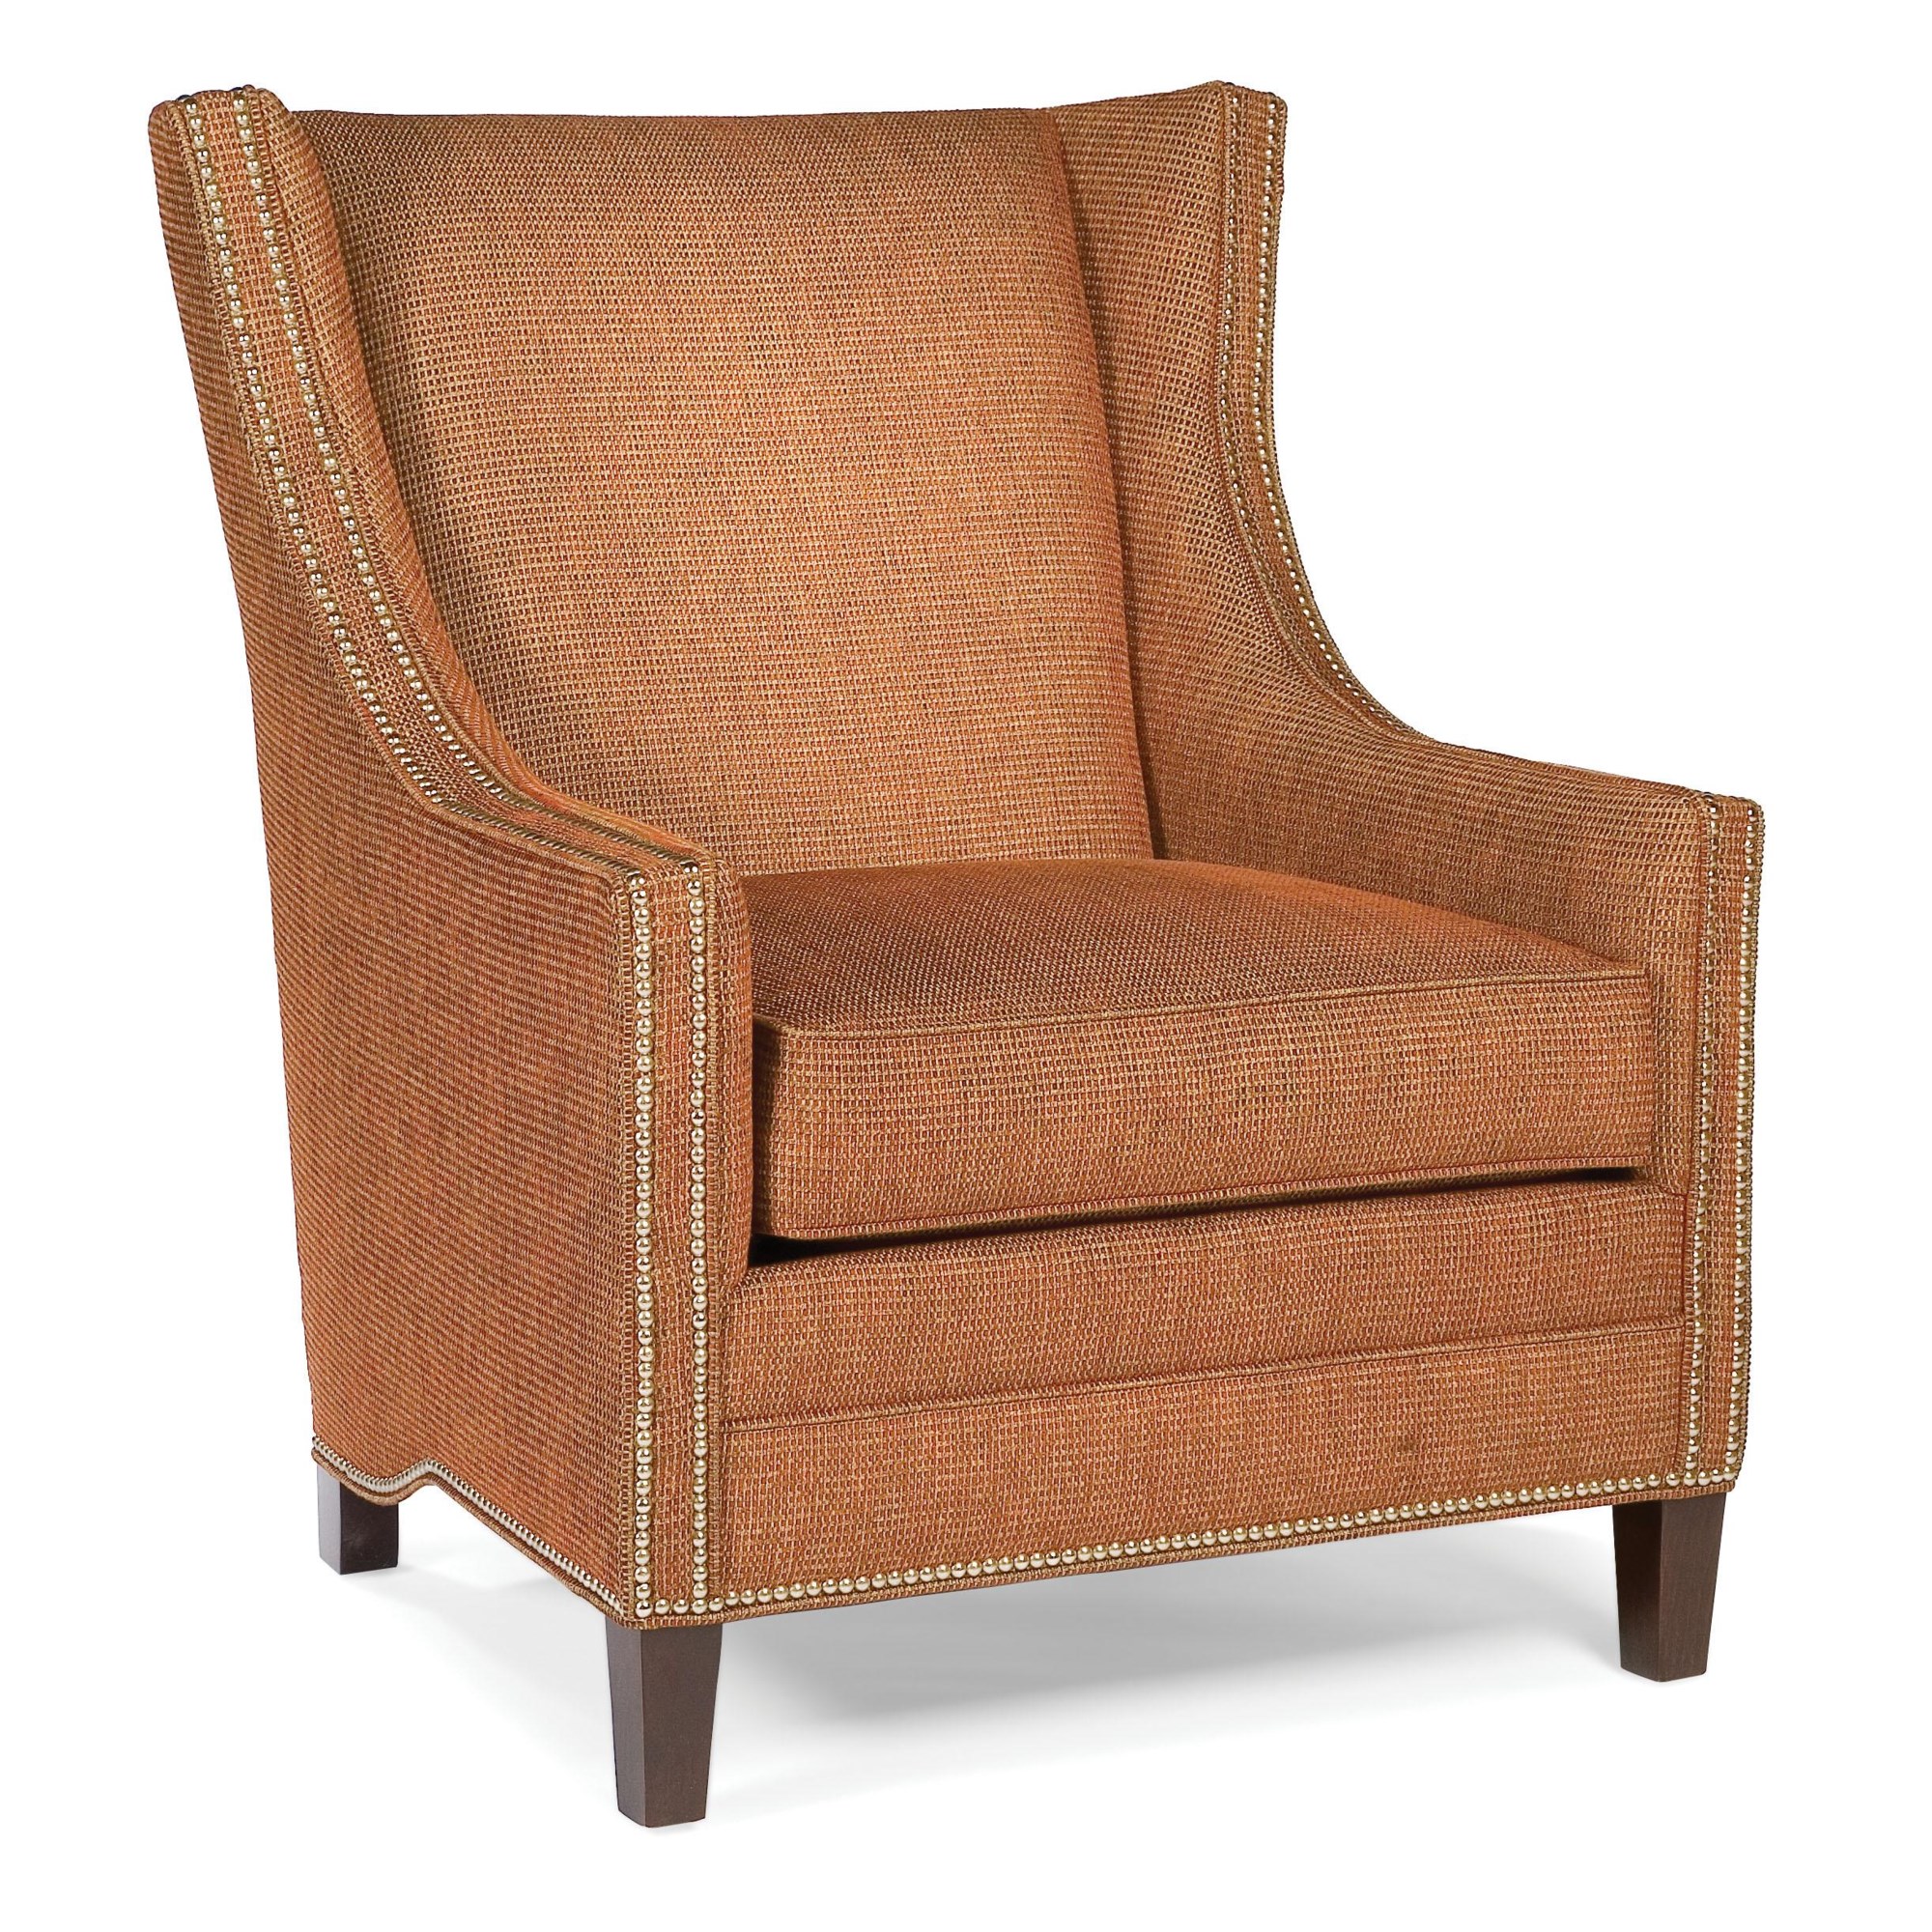 Modern fabric on a traditional chair.  Dining chair upholstery, Upholstery fabric  for chairs, Modern wingback chairs